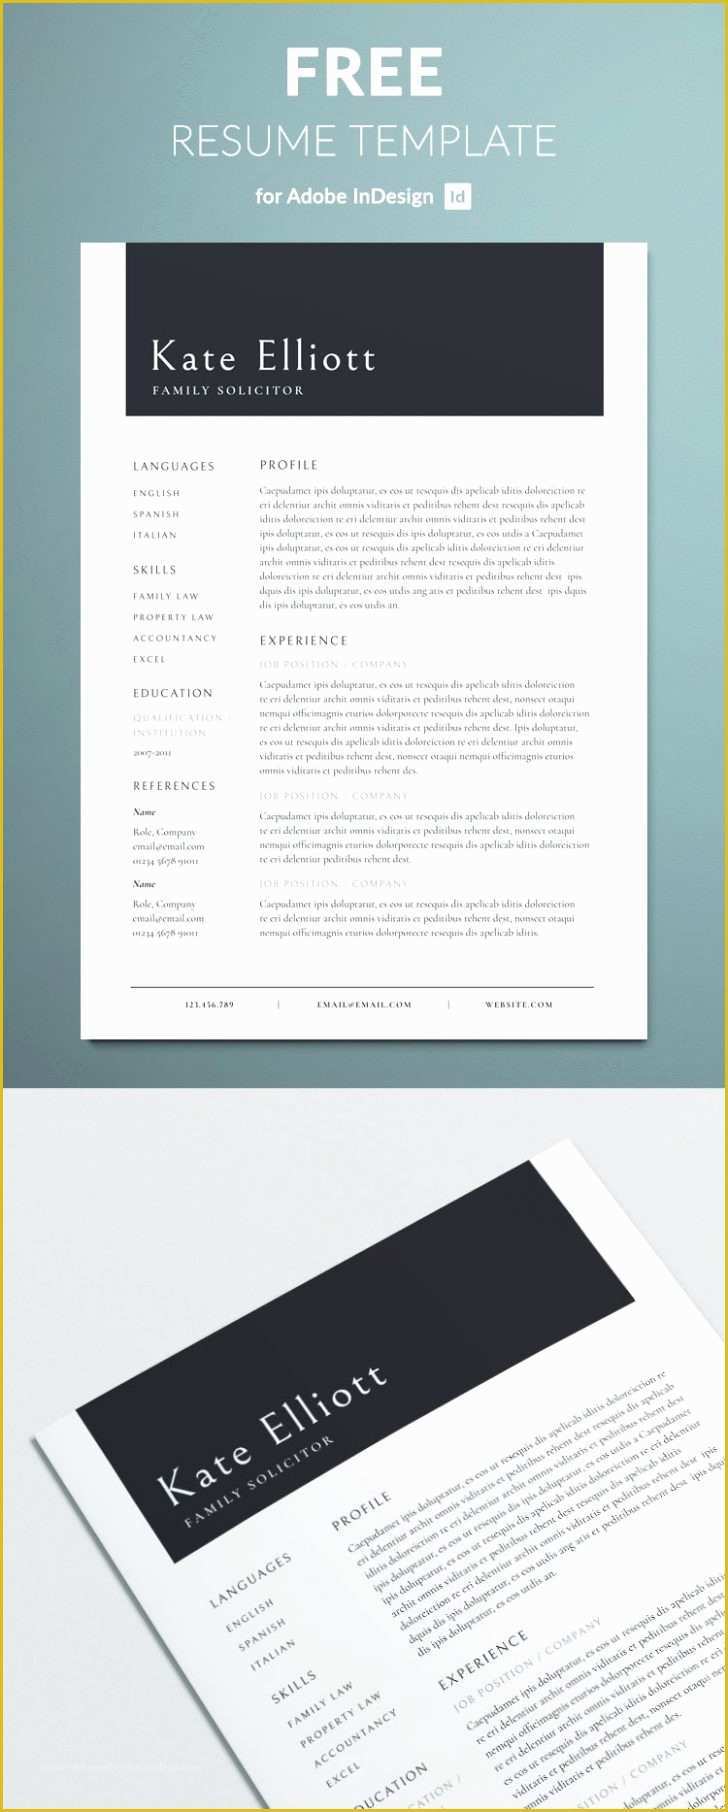 Indesign Resume Template Free Download Of Resume and Template Free Indesign Resume Template Free